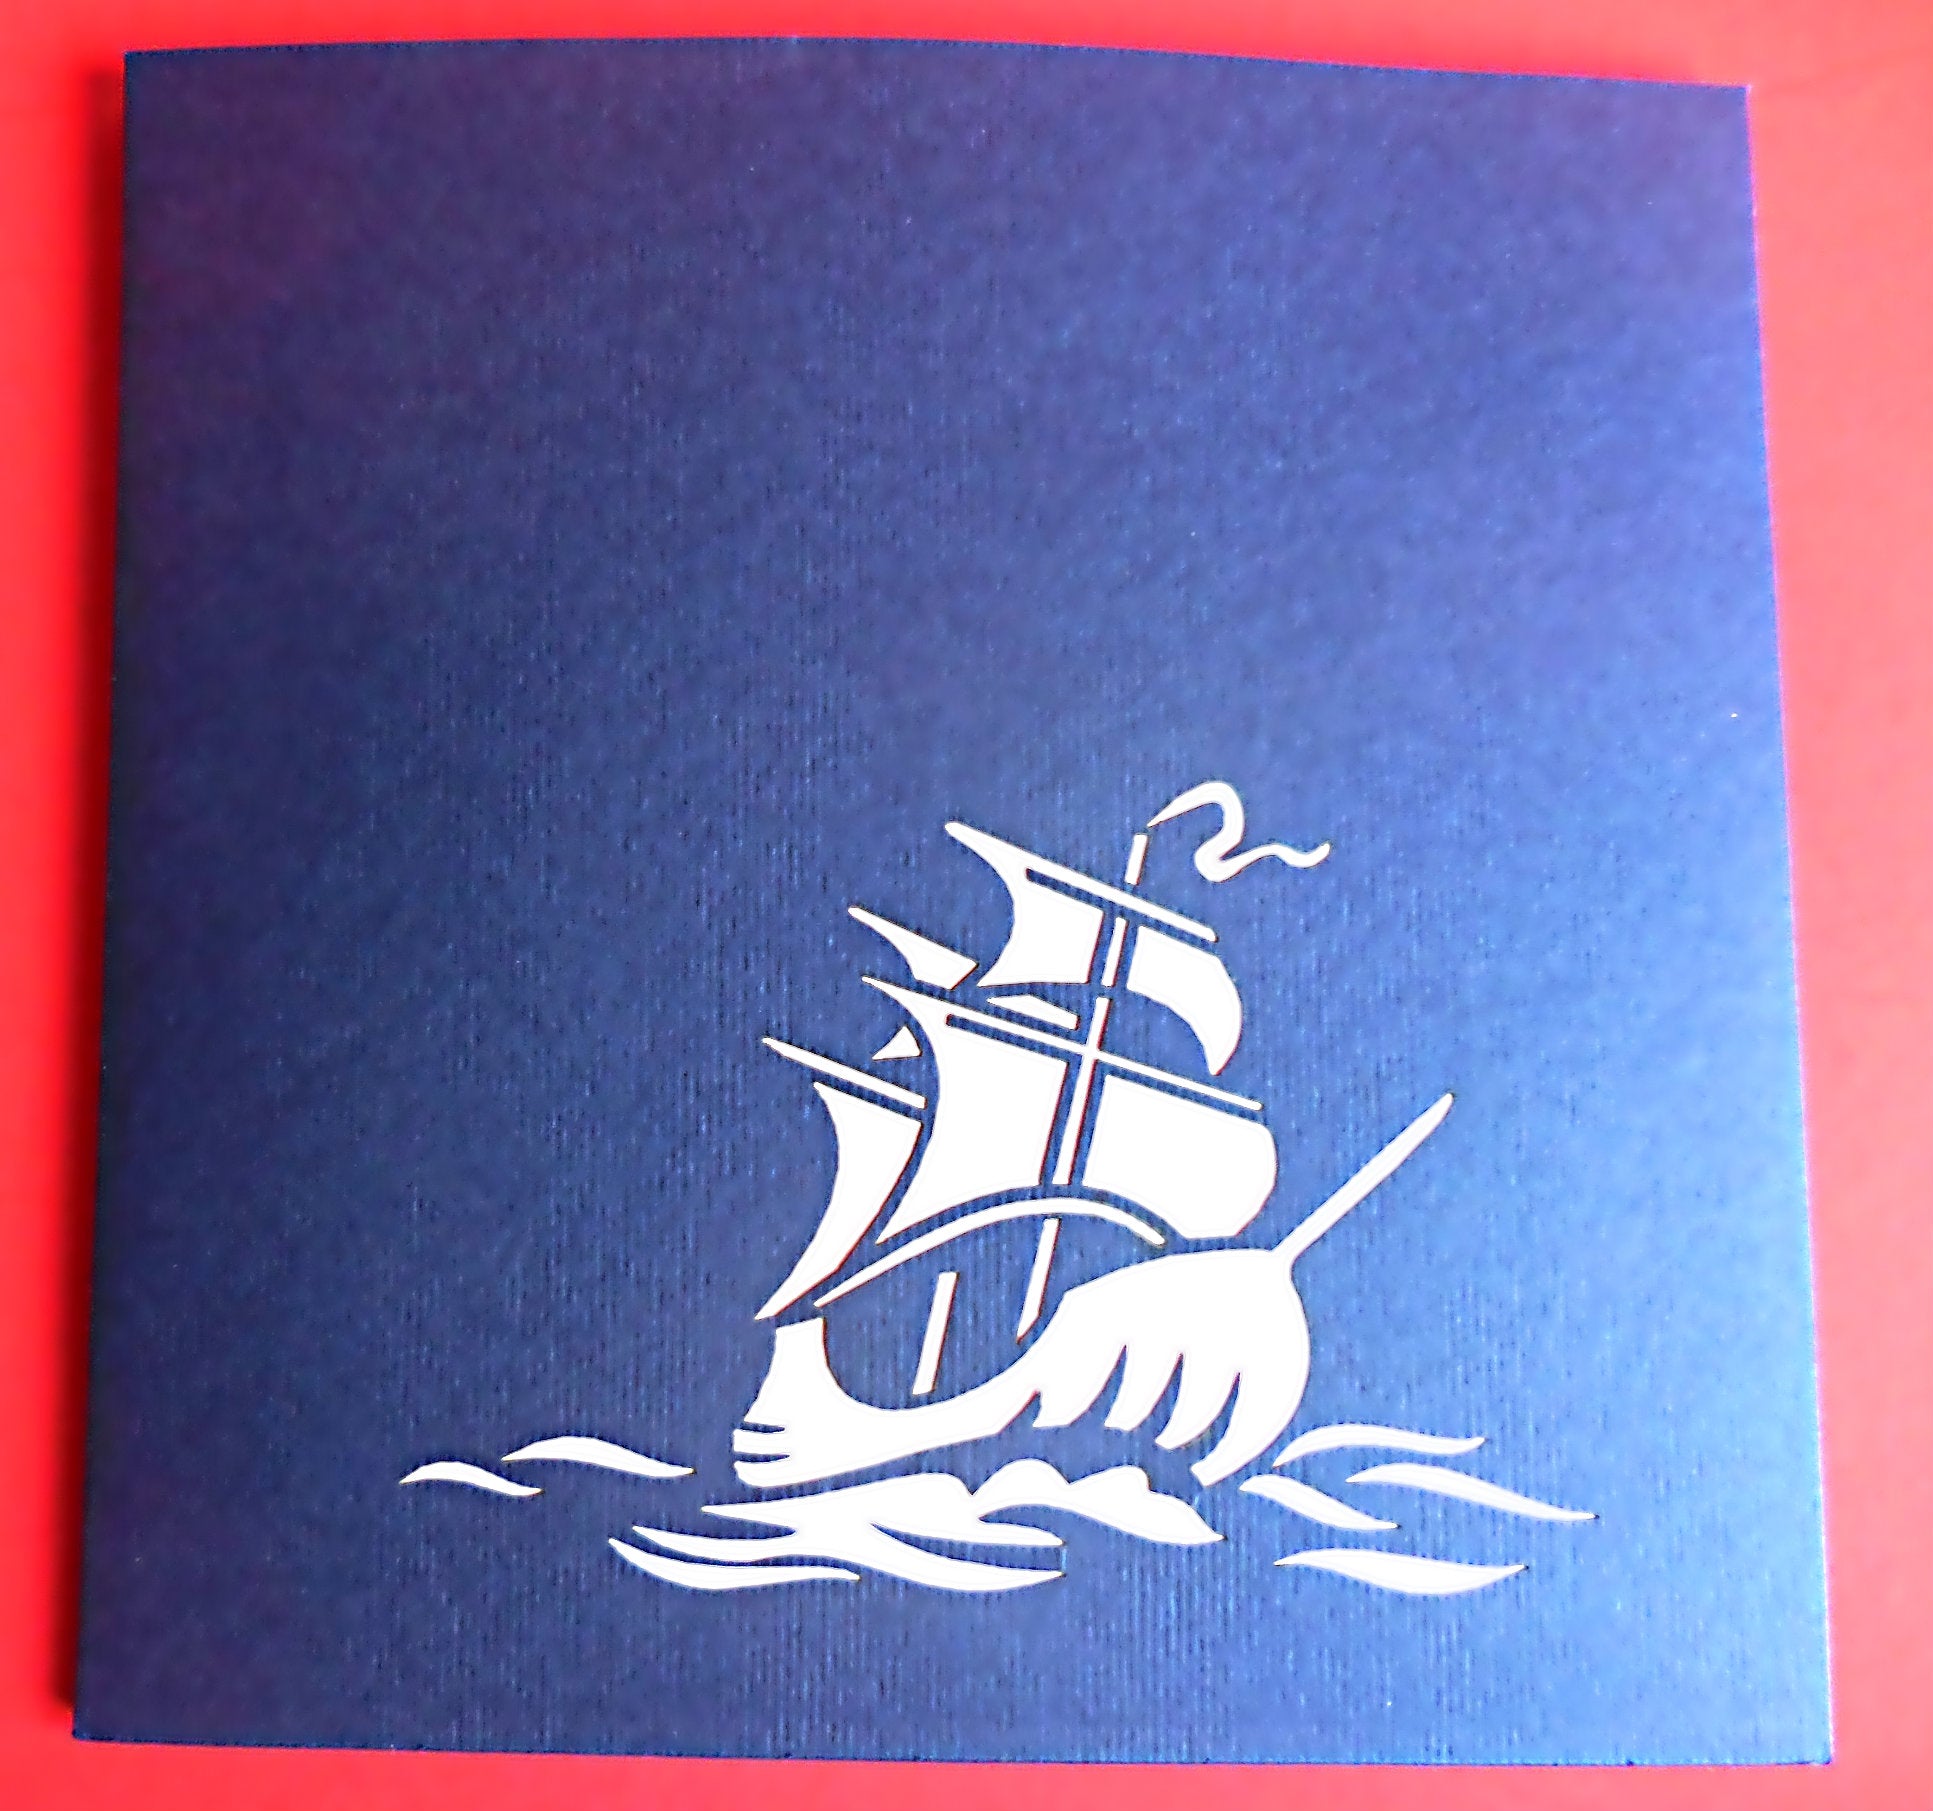 War Ship 3D Pop Up Greeting Card - Birthday - Bon Voyage - Father's Day - Fun - iGifts And Cards